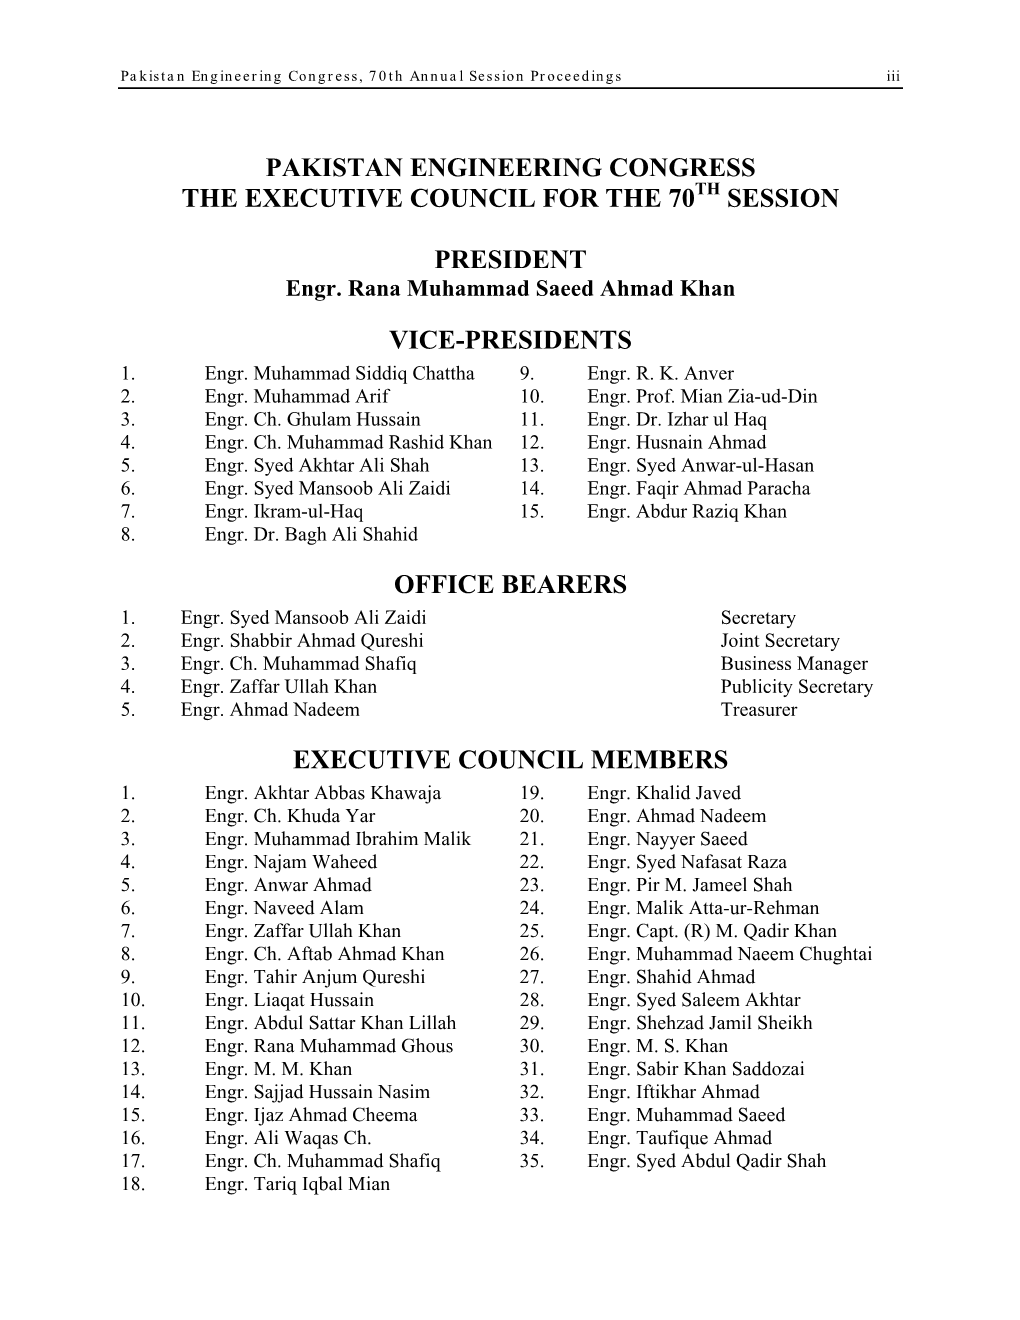 Pakistan Engineering Congress the Executive Council for the 70 Session President Vice-Presidents Office Bearers Executive Counc